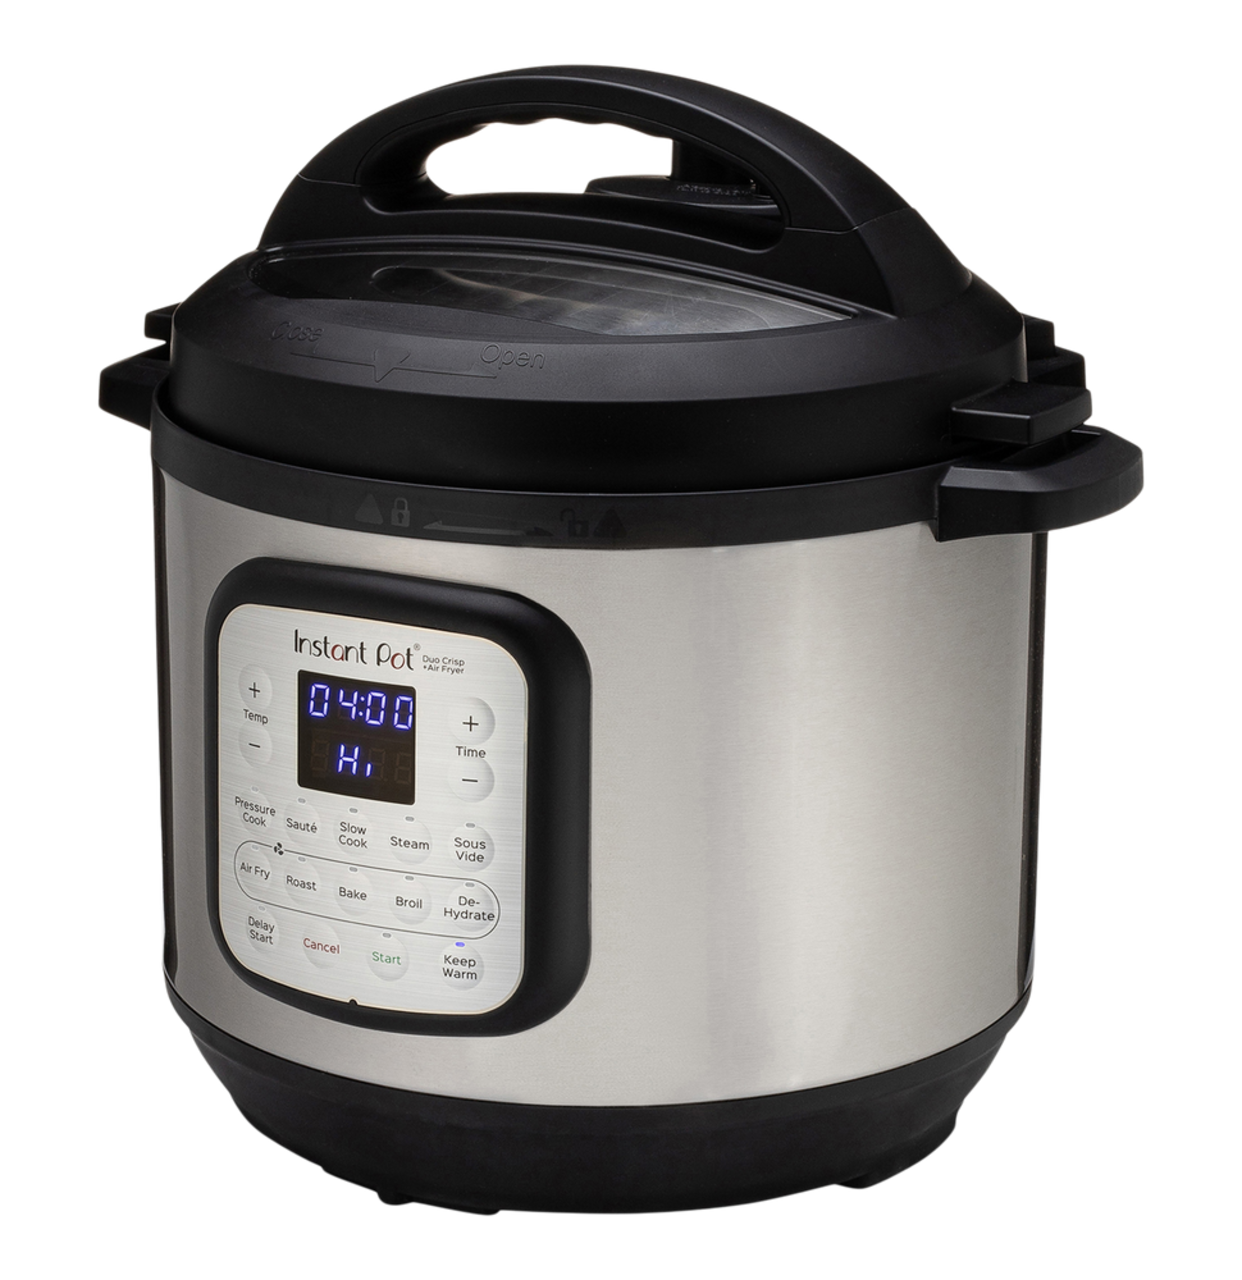 https://media-www.canadiantire.ca/product/living/kitchen/kitchen-appliances/0432708/instant-pot-air-fryer-combo-976a2d15-f7dd-4fd6-a238-f885c12a7999.png?imdensity=1&imwidth=640&impolicy=mZoom